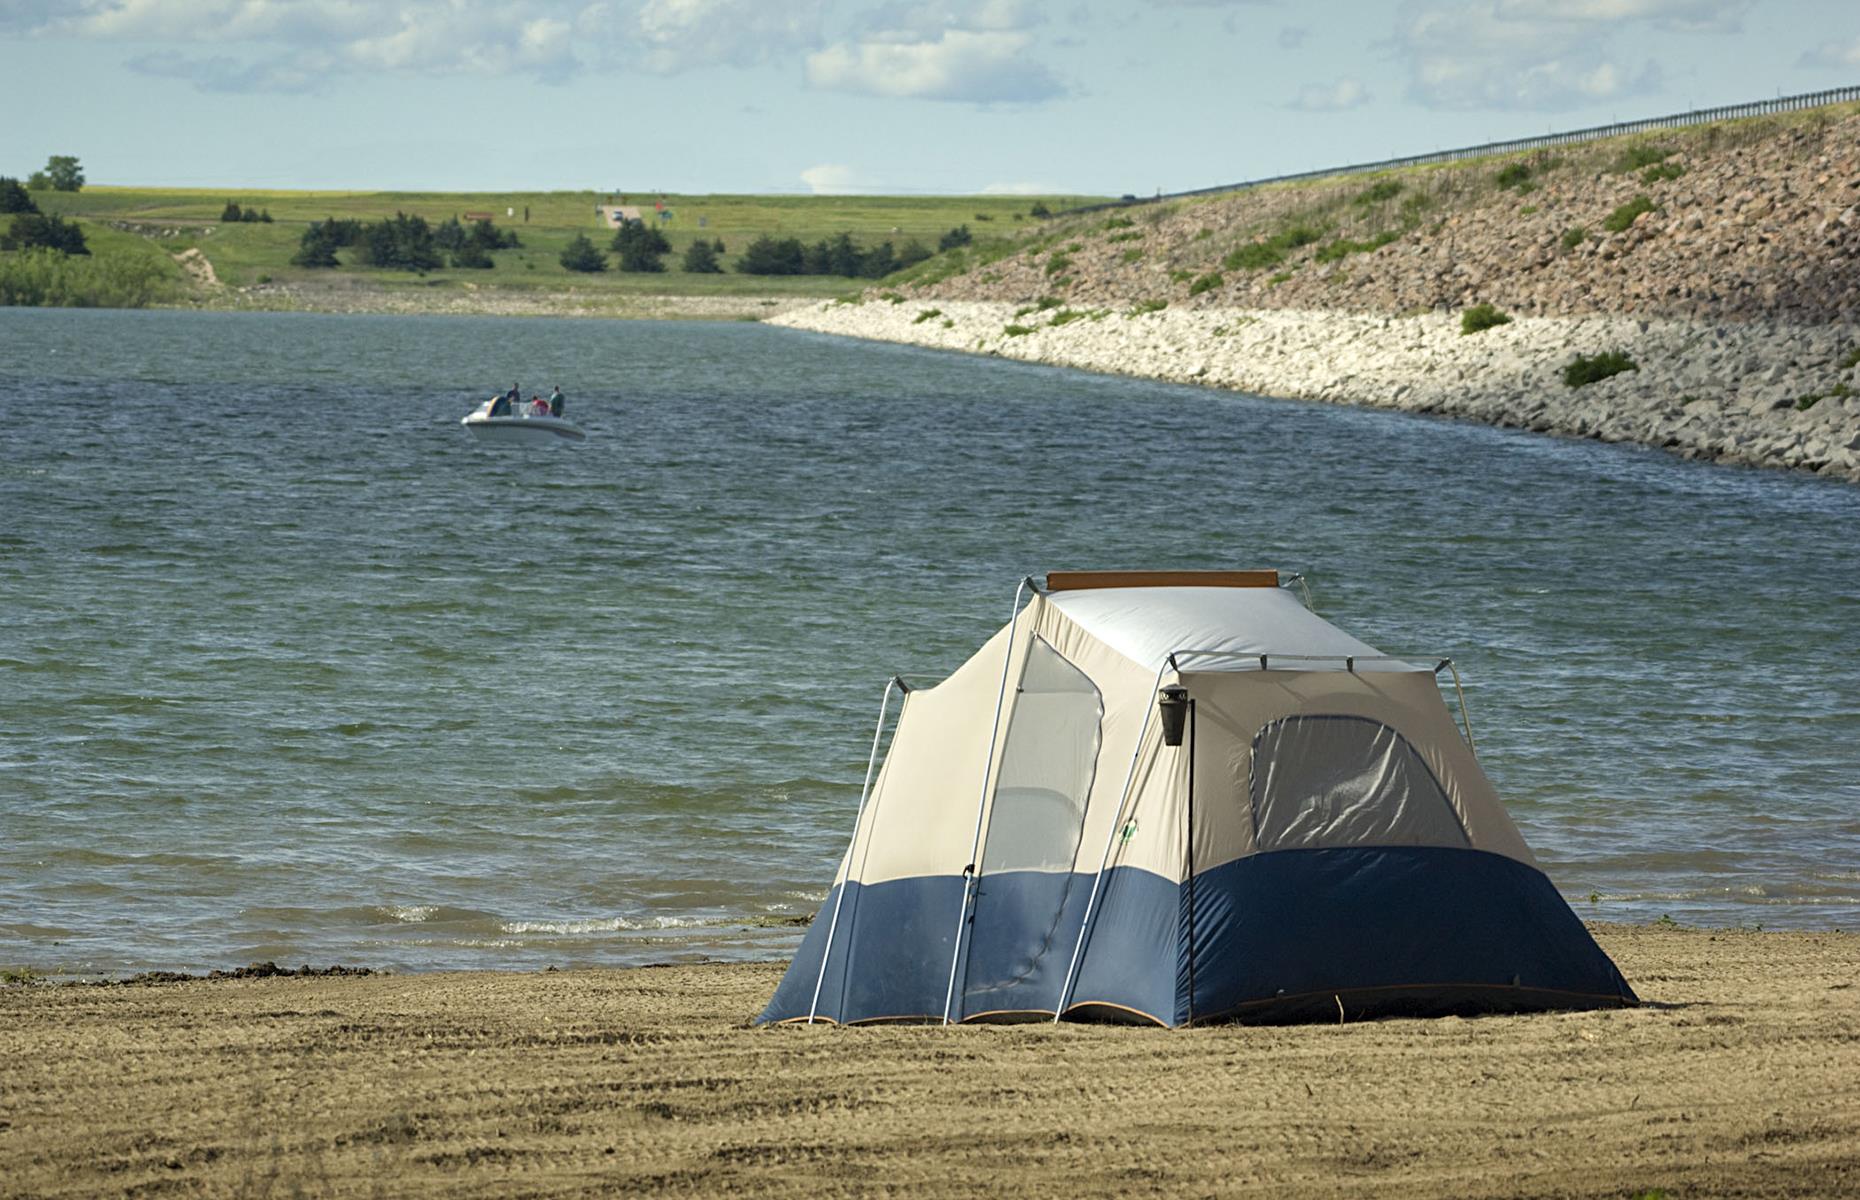 The vast Swanson Reservoir State Recreation Area is one of the finest places to camp in the Cornhusker State. The vast body of water – which takes over a pocket of southwestern Nebraska – is a haven for boaters and kayakers, and you can camp inches from the water on the broad sand and grass banks.